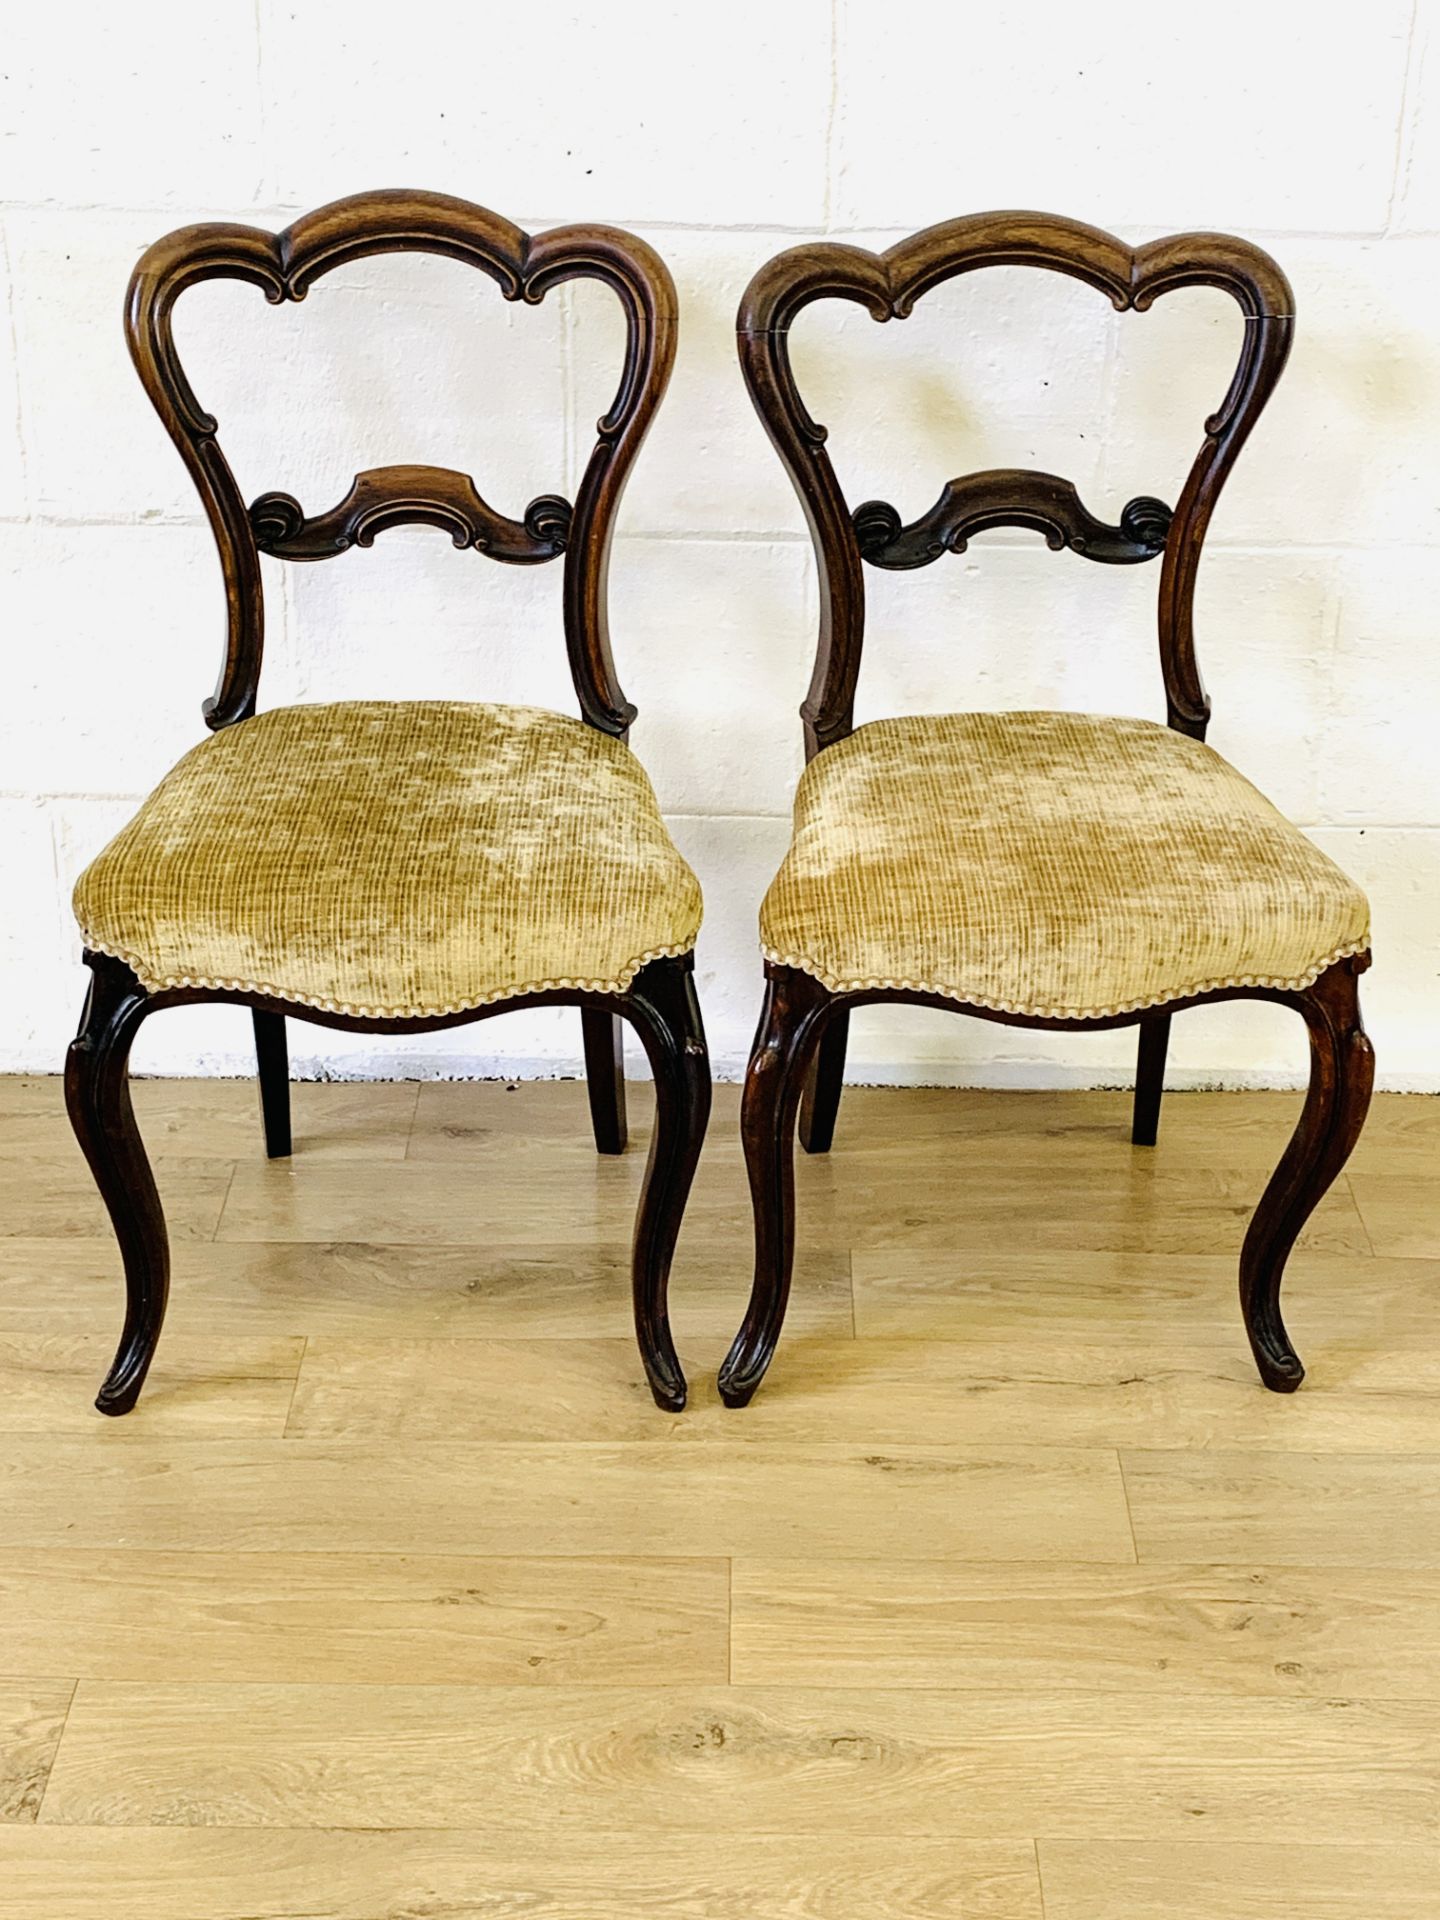 Pair of Victorian dining chairs